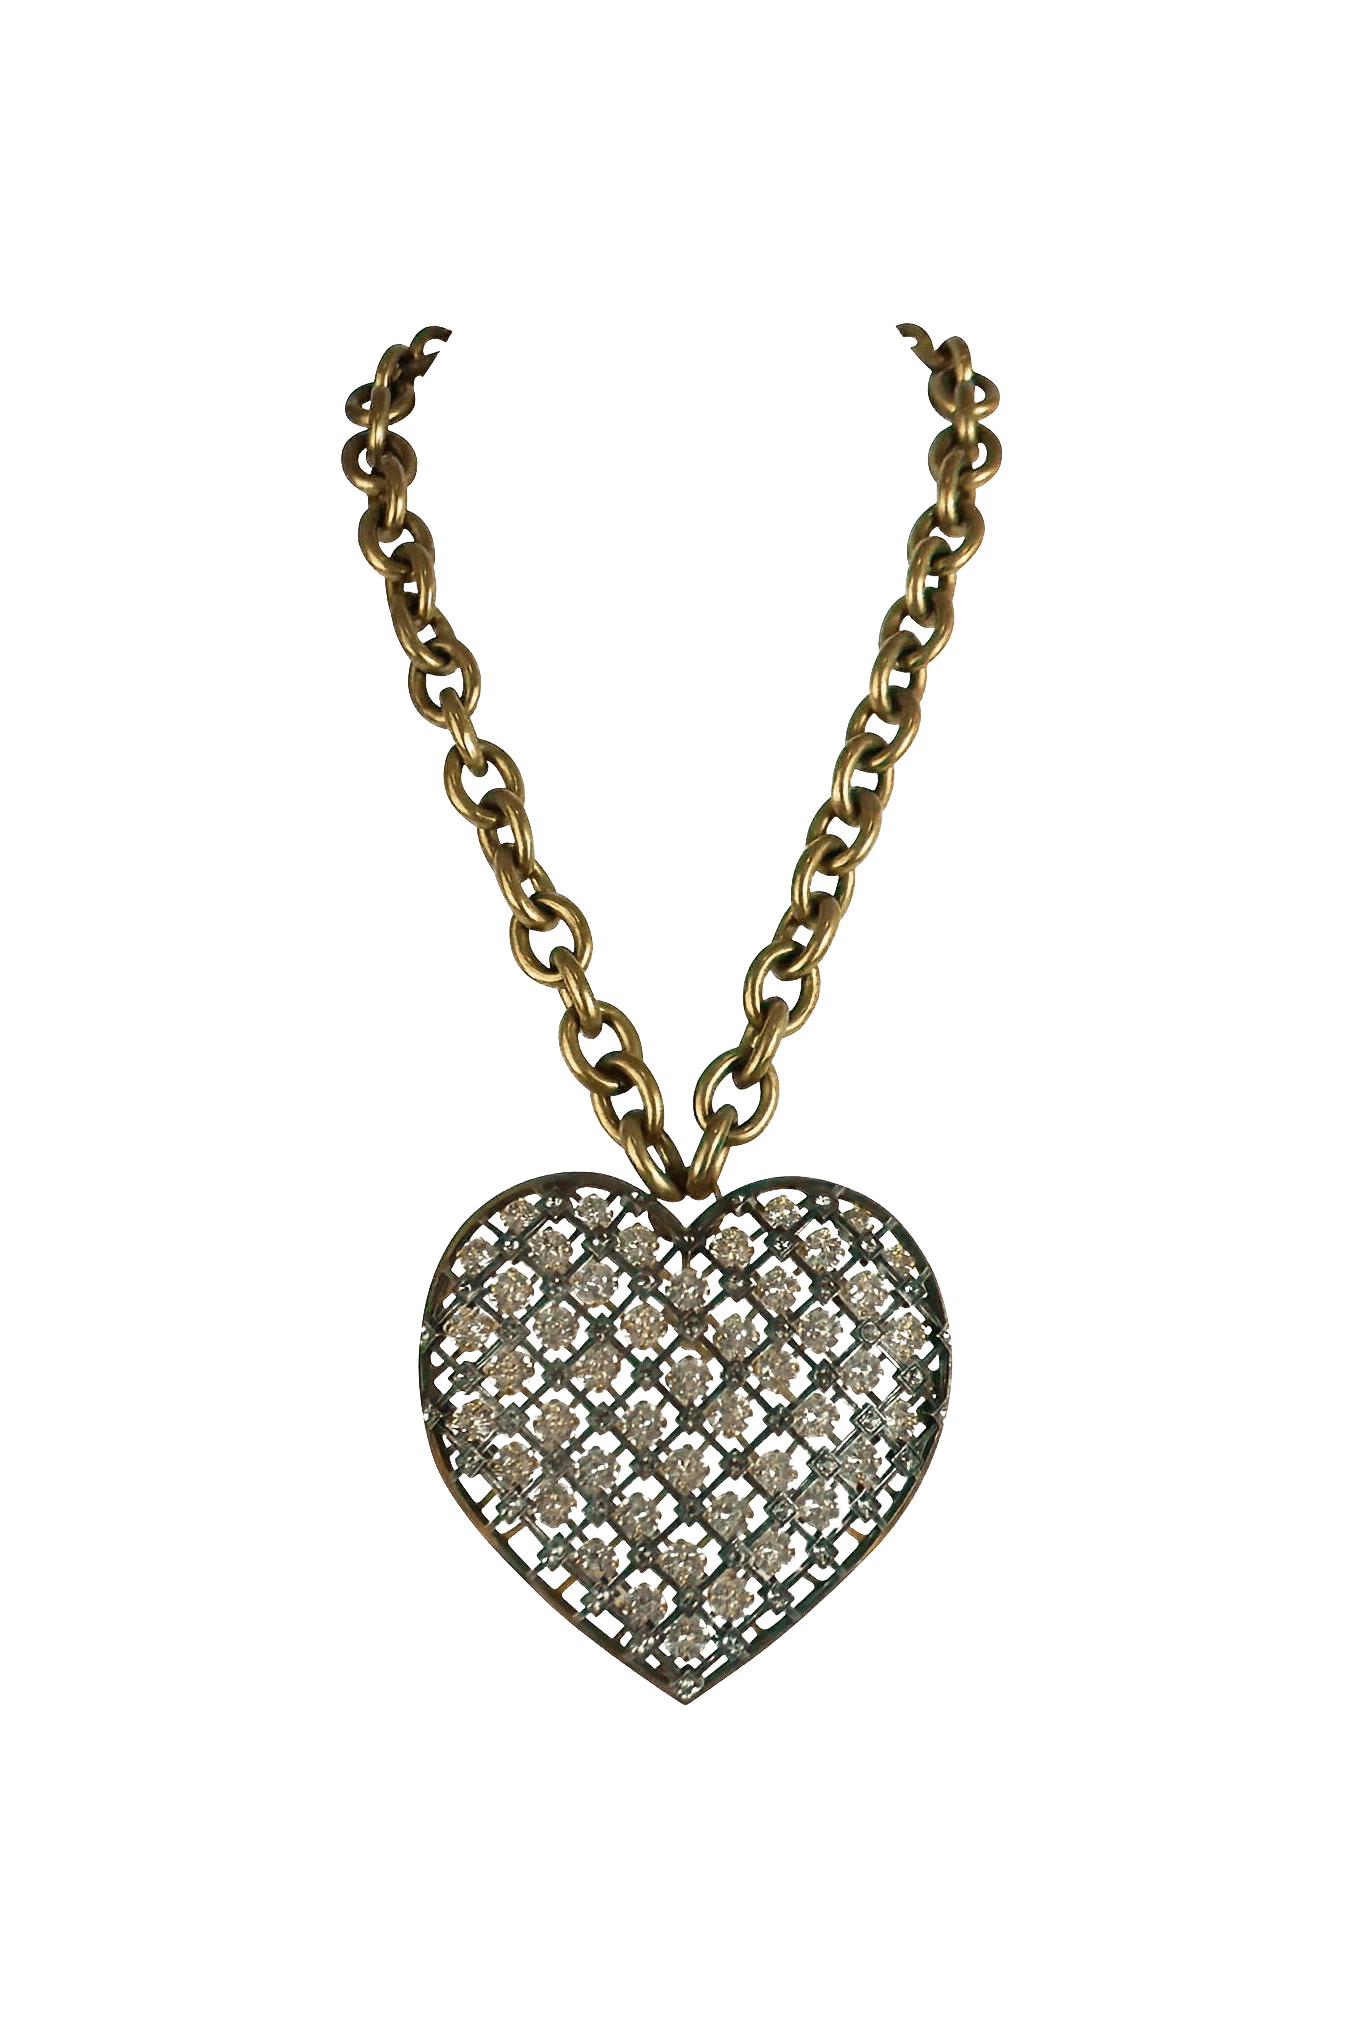 Lanvin Massive Caged Crystal "Big Heart" Necklace 2014 - Foxy Couture Carmel